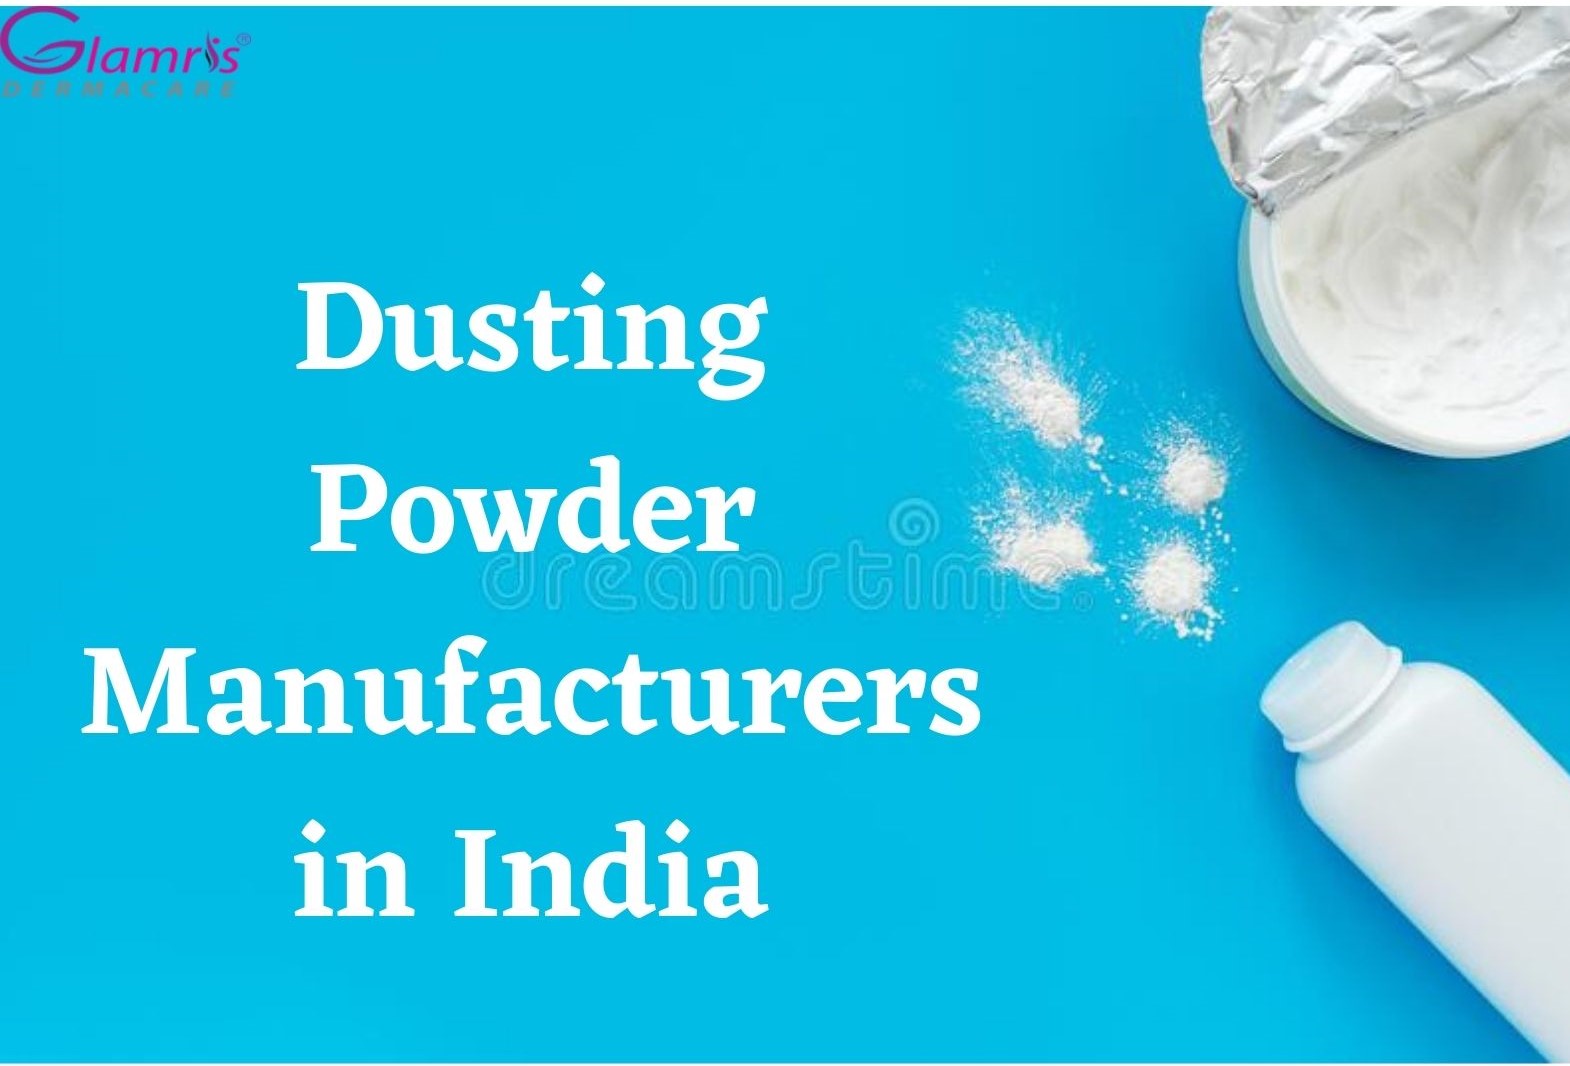 Dusting Powder Manufacturers in India